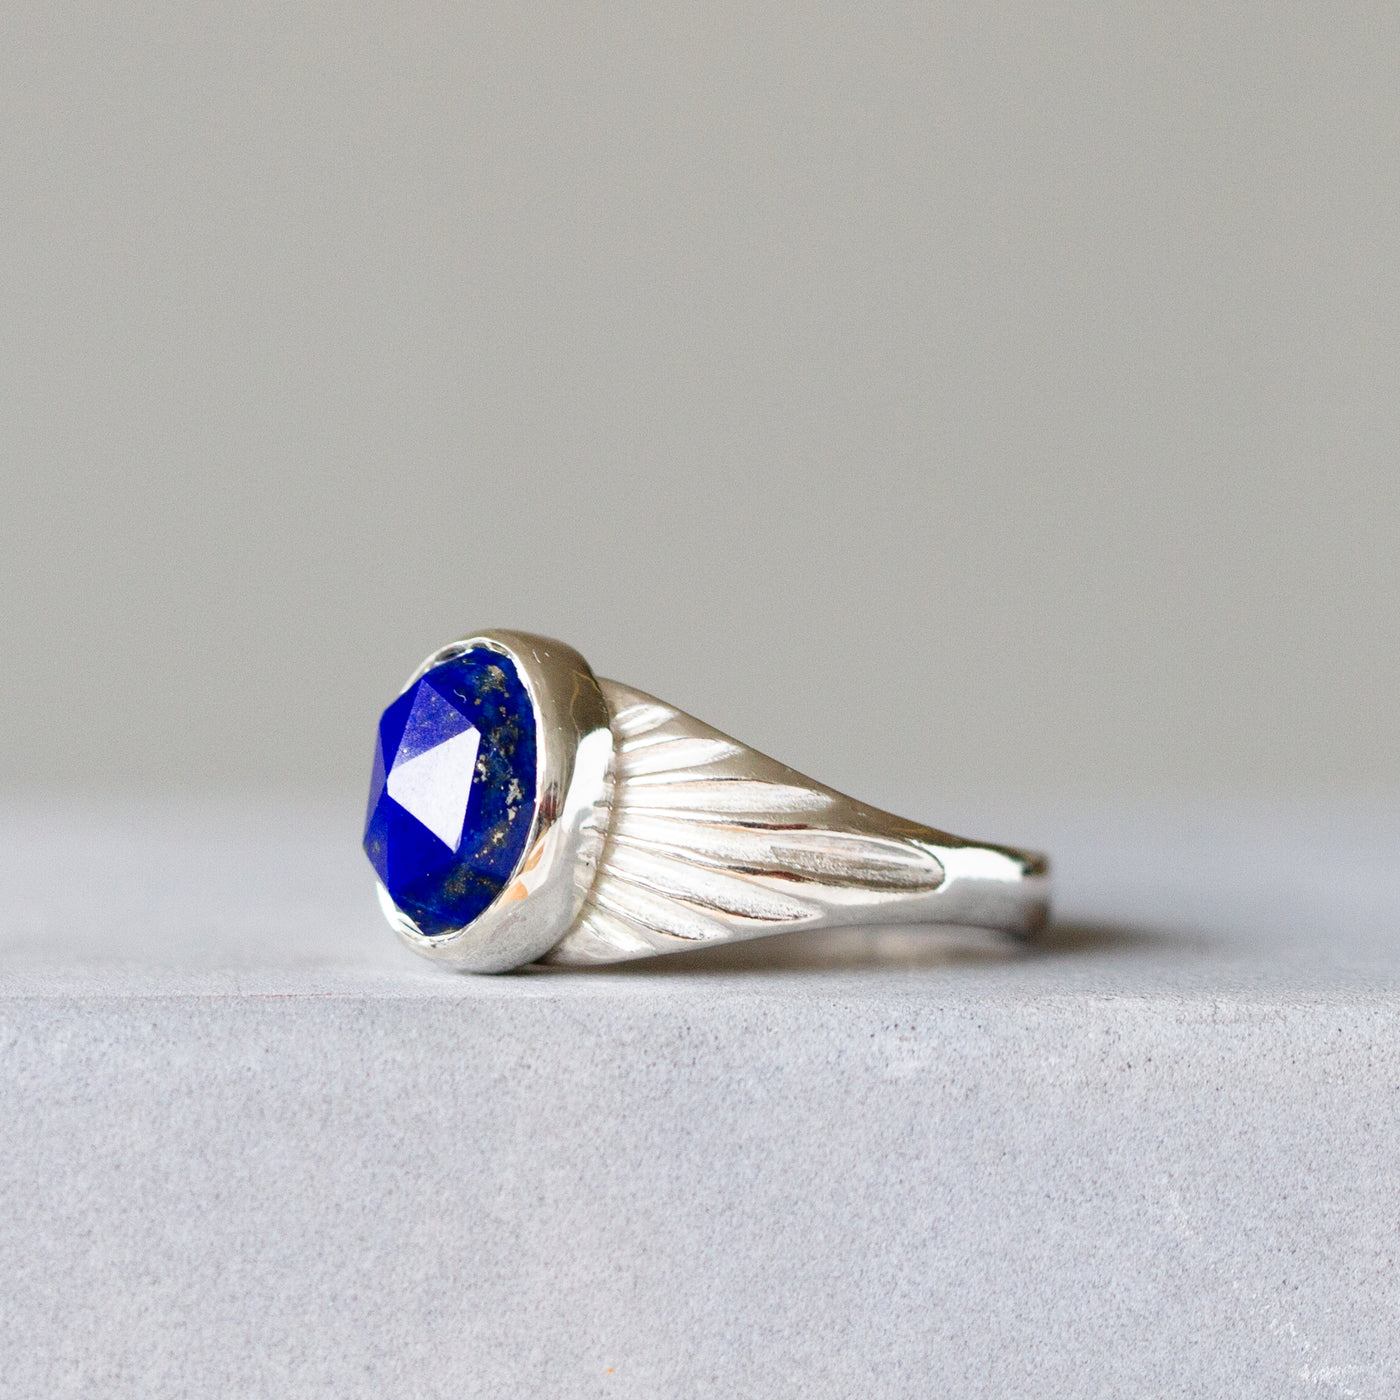 Lapis and Silver Calista Ring